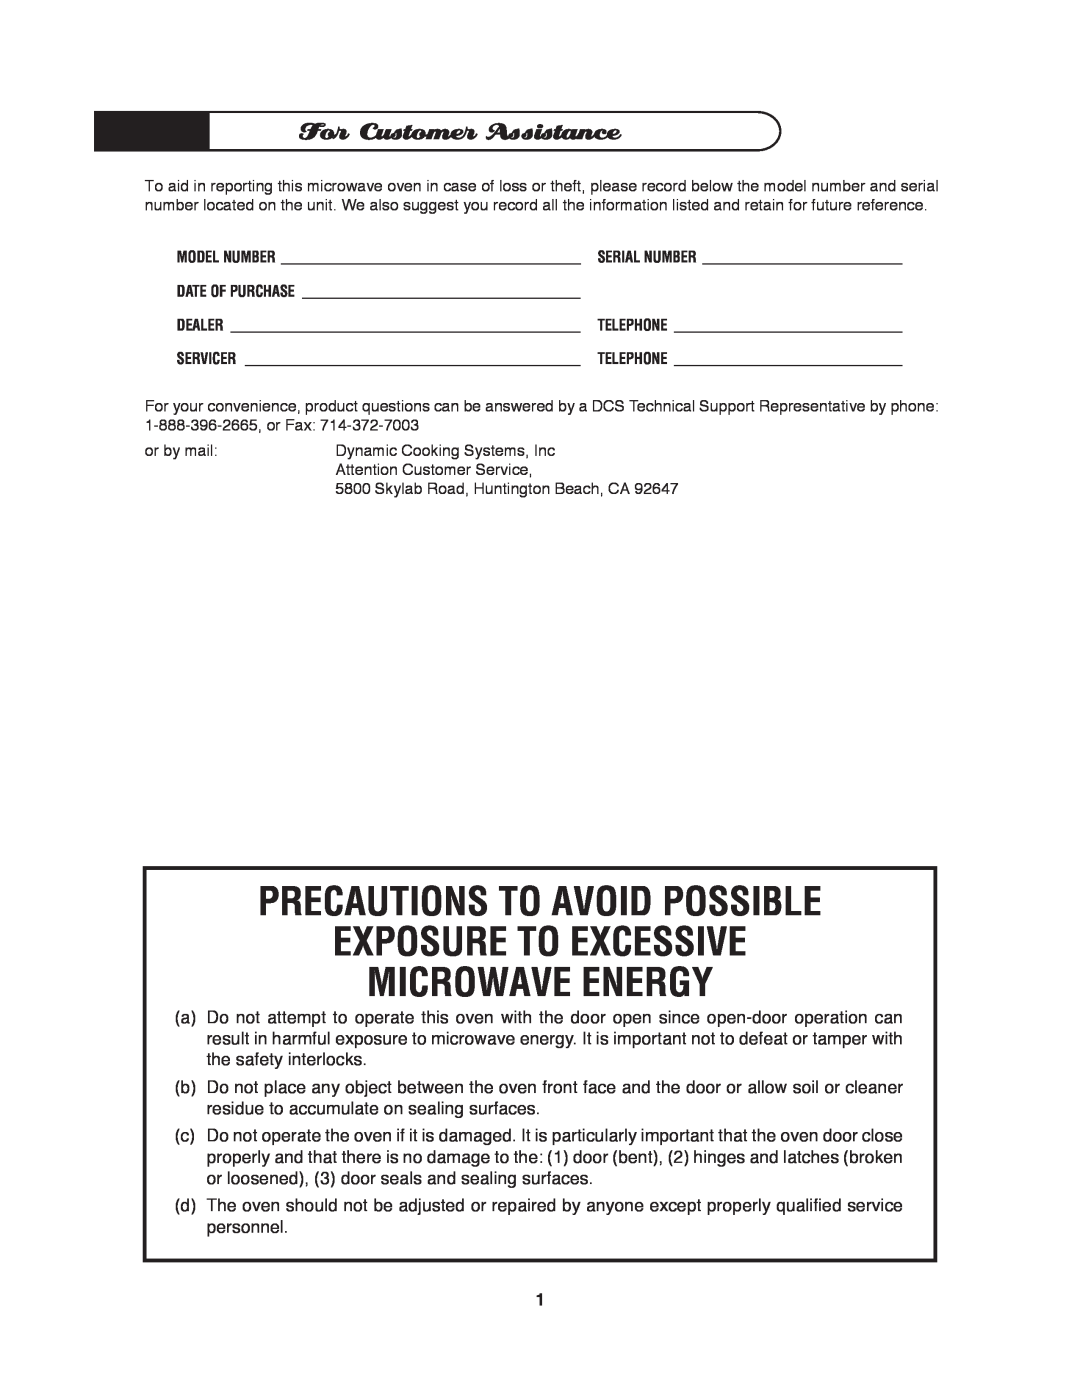 DCS MO-24SS manual For Customer Assistance, Precautions To Avoid Possible, Exposure To Excessive Microwave Energy 